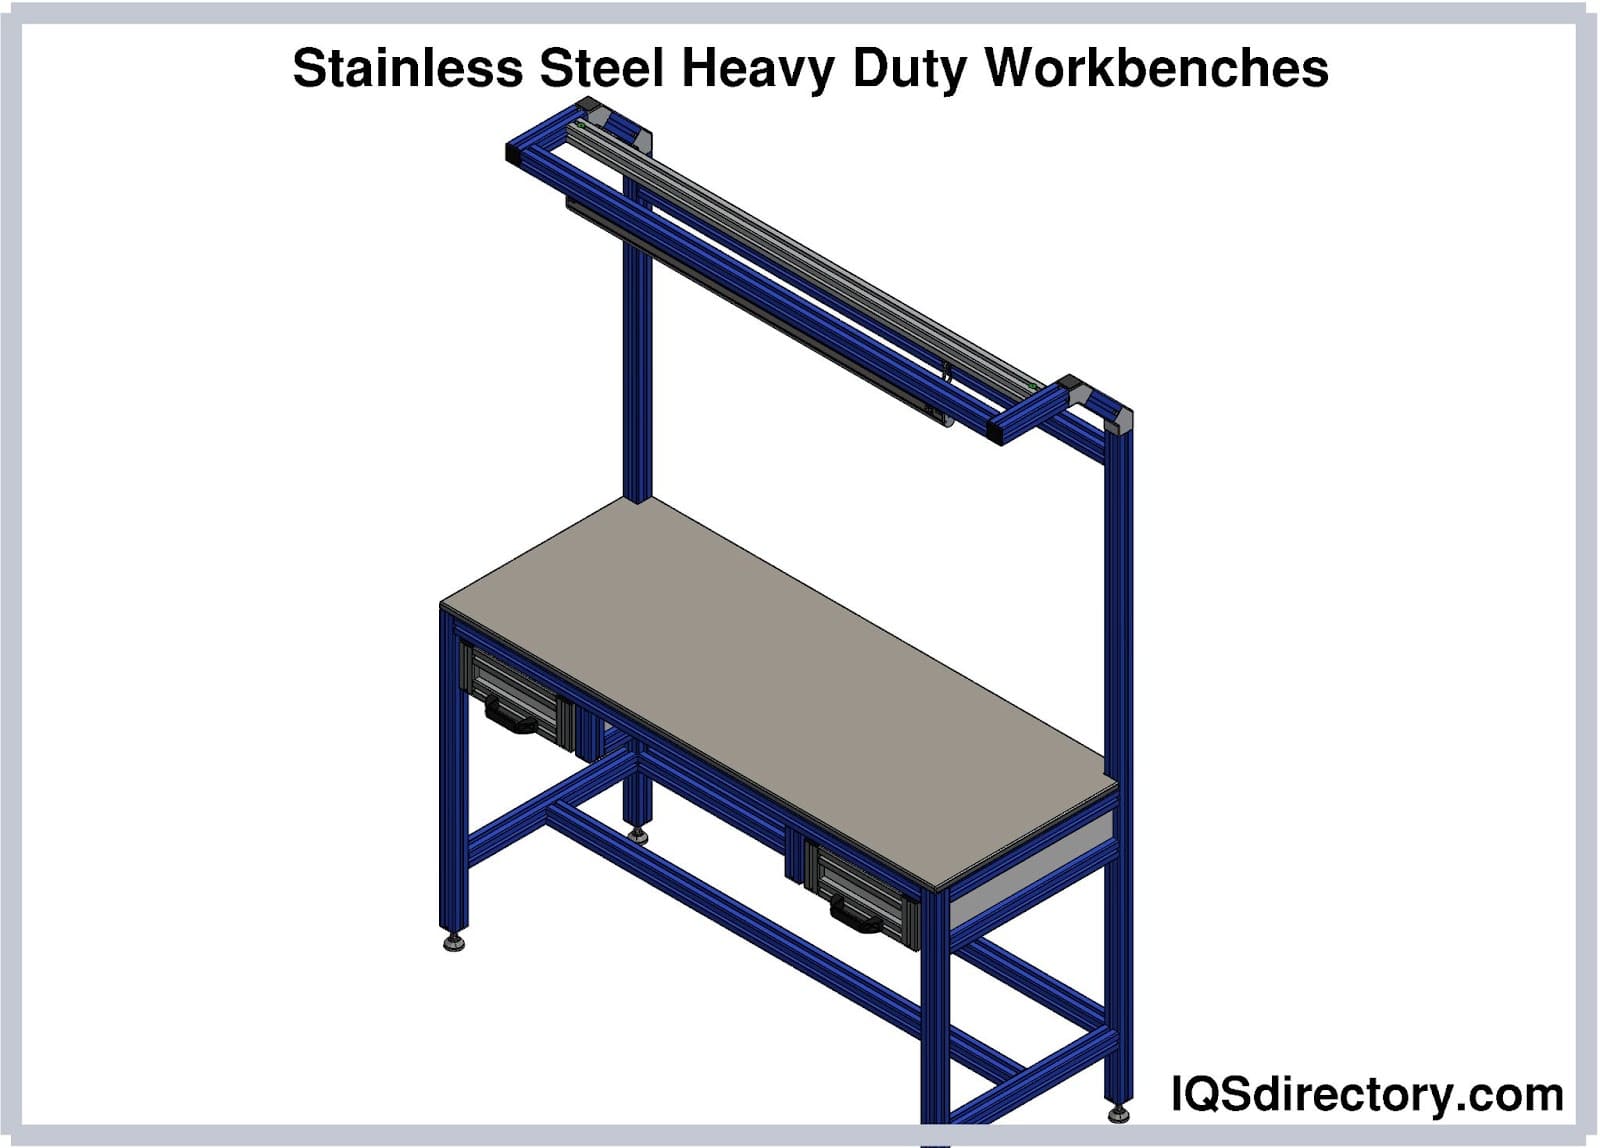 stainless steel heavy duty workbenches